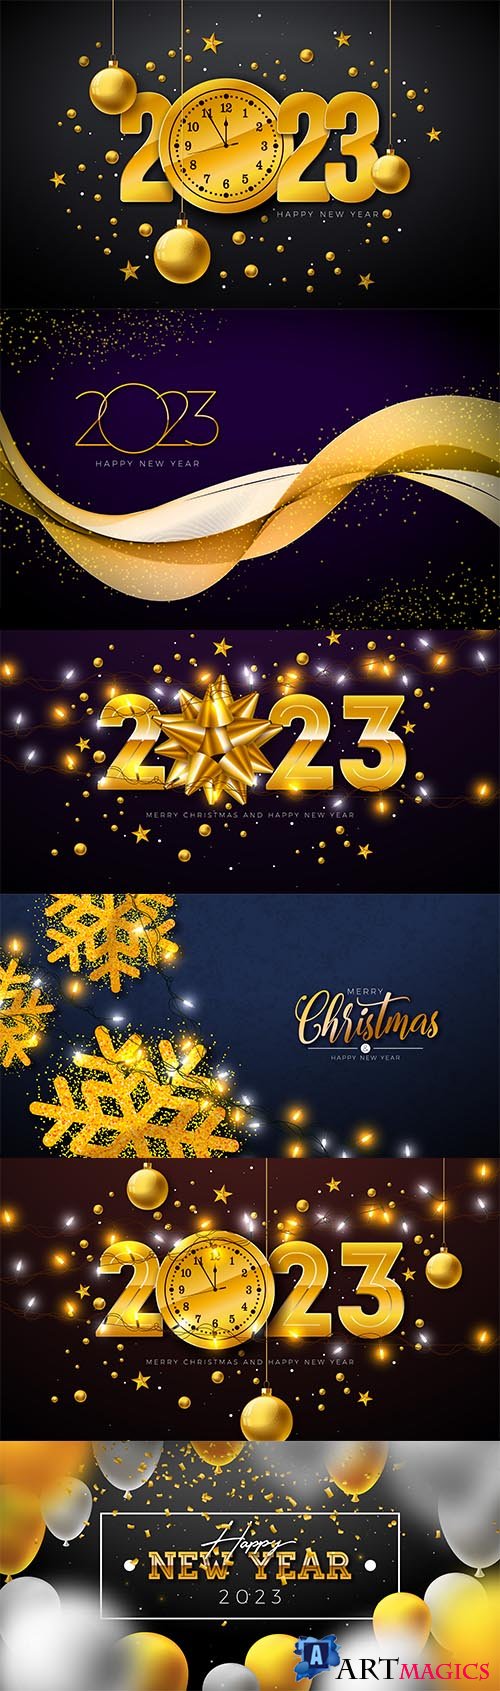 Happy new year 2023 illustration with gold number clock and ornamental glass ball on dark background